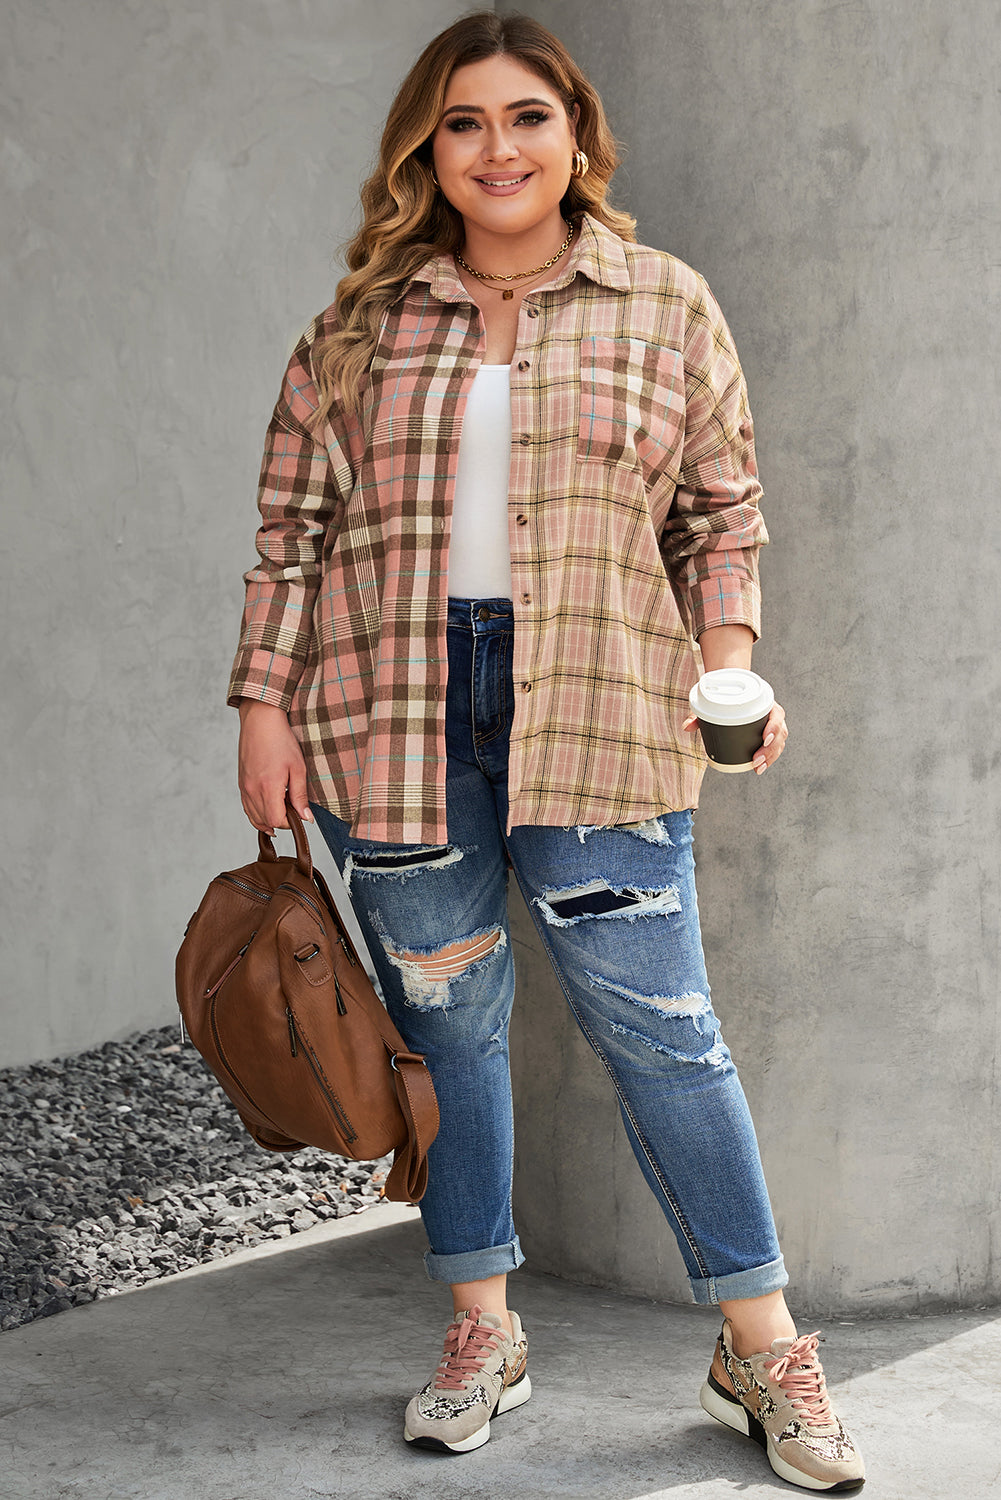 Pink Plus Size Color Block Plaid Long Sleeve Shirt with Pocket